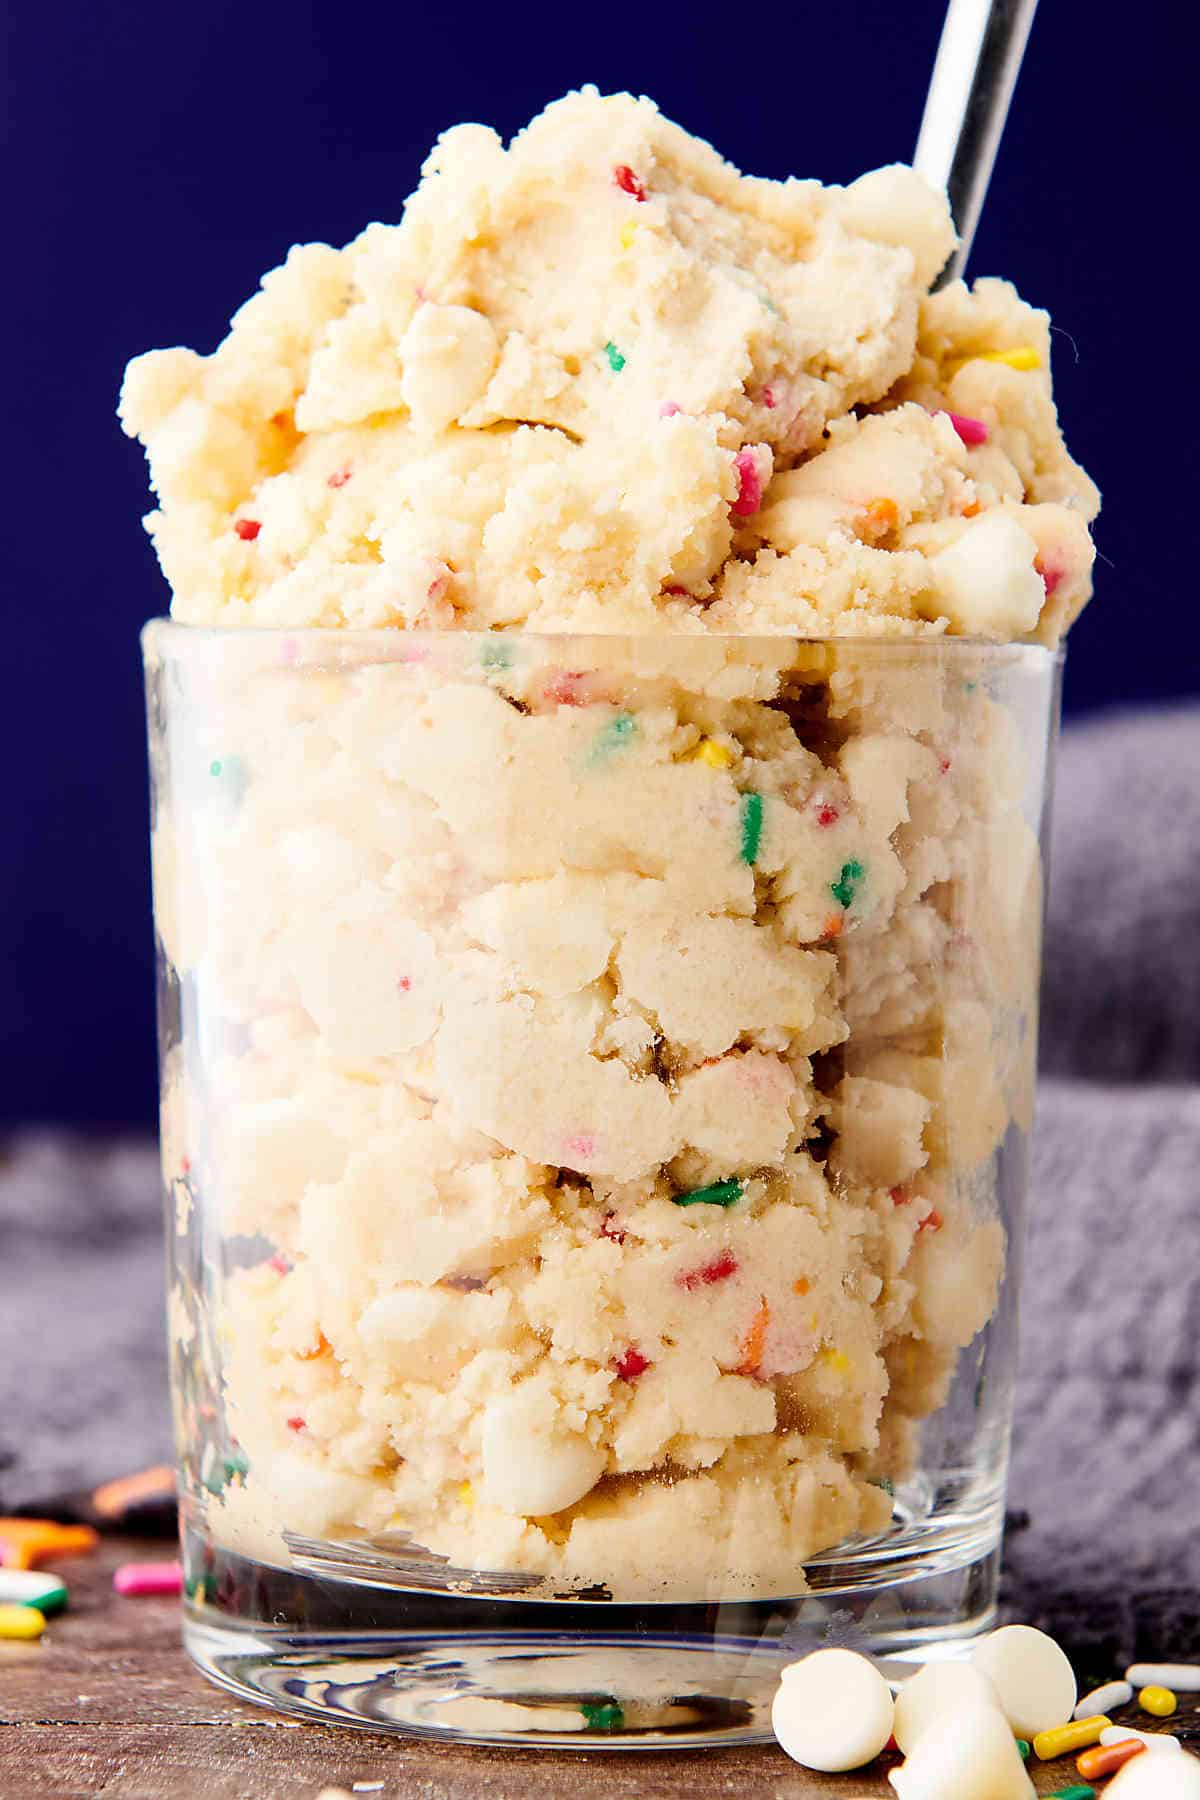 Edible Sugar Cookie Dough - Eggless and Safe to Eat Raw!